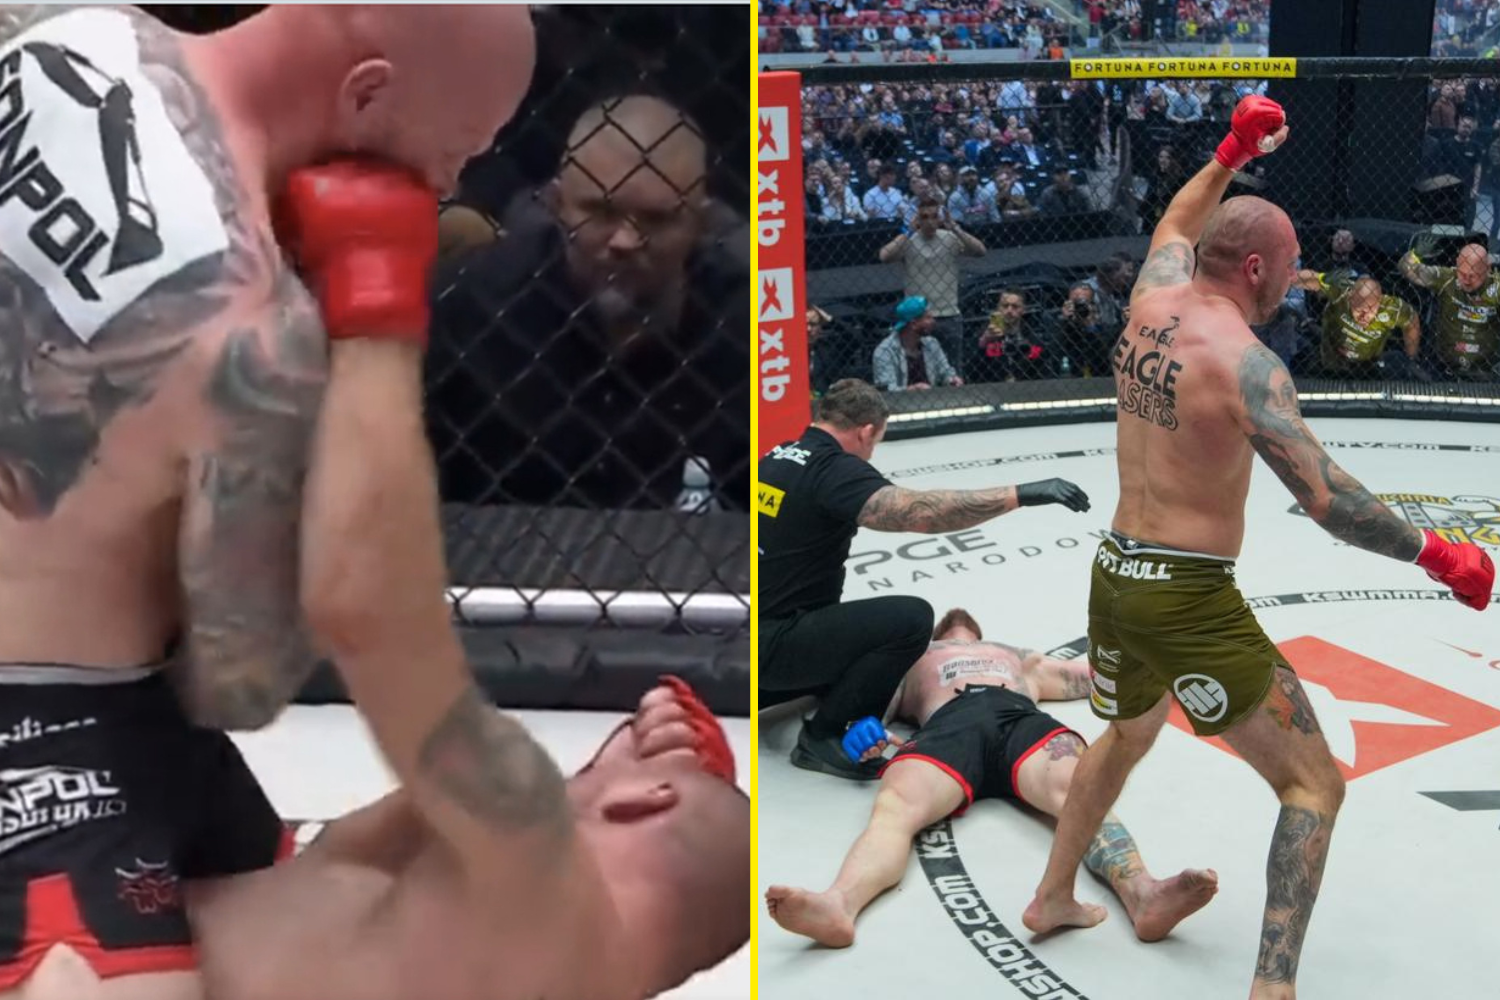 Former world champion boxer who lost title to Oleksandr Usyk pulls off insane MMA KO